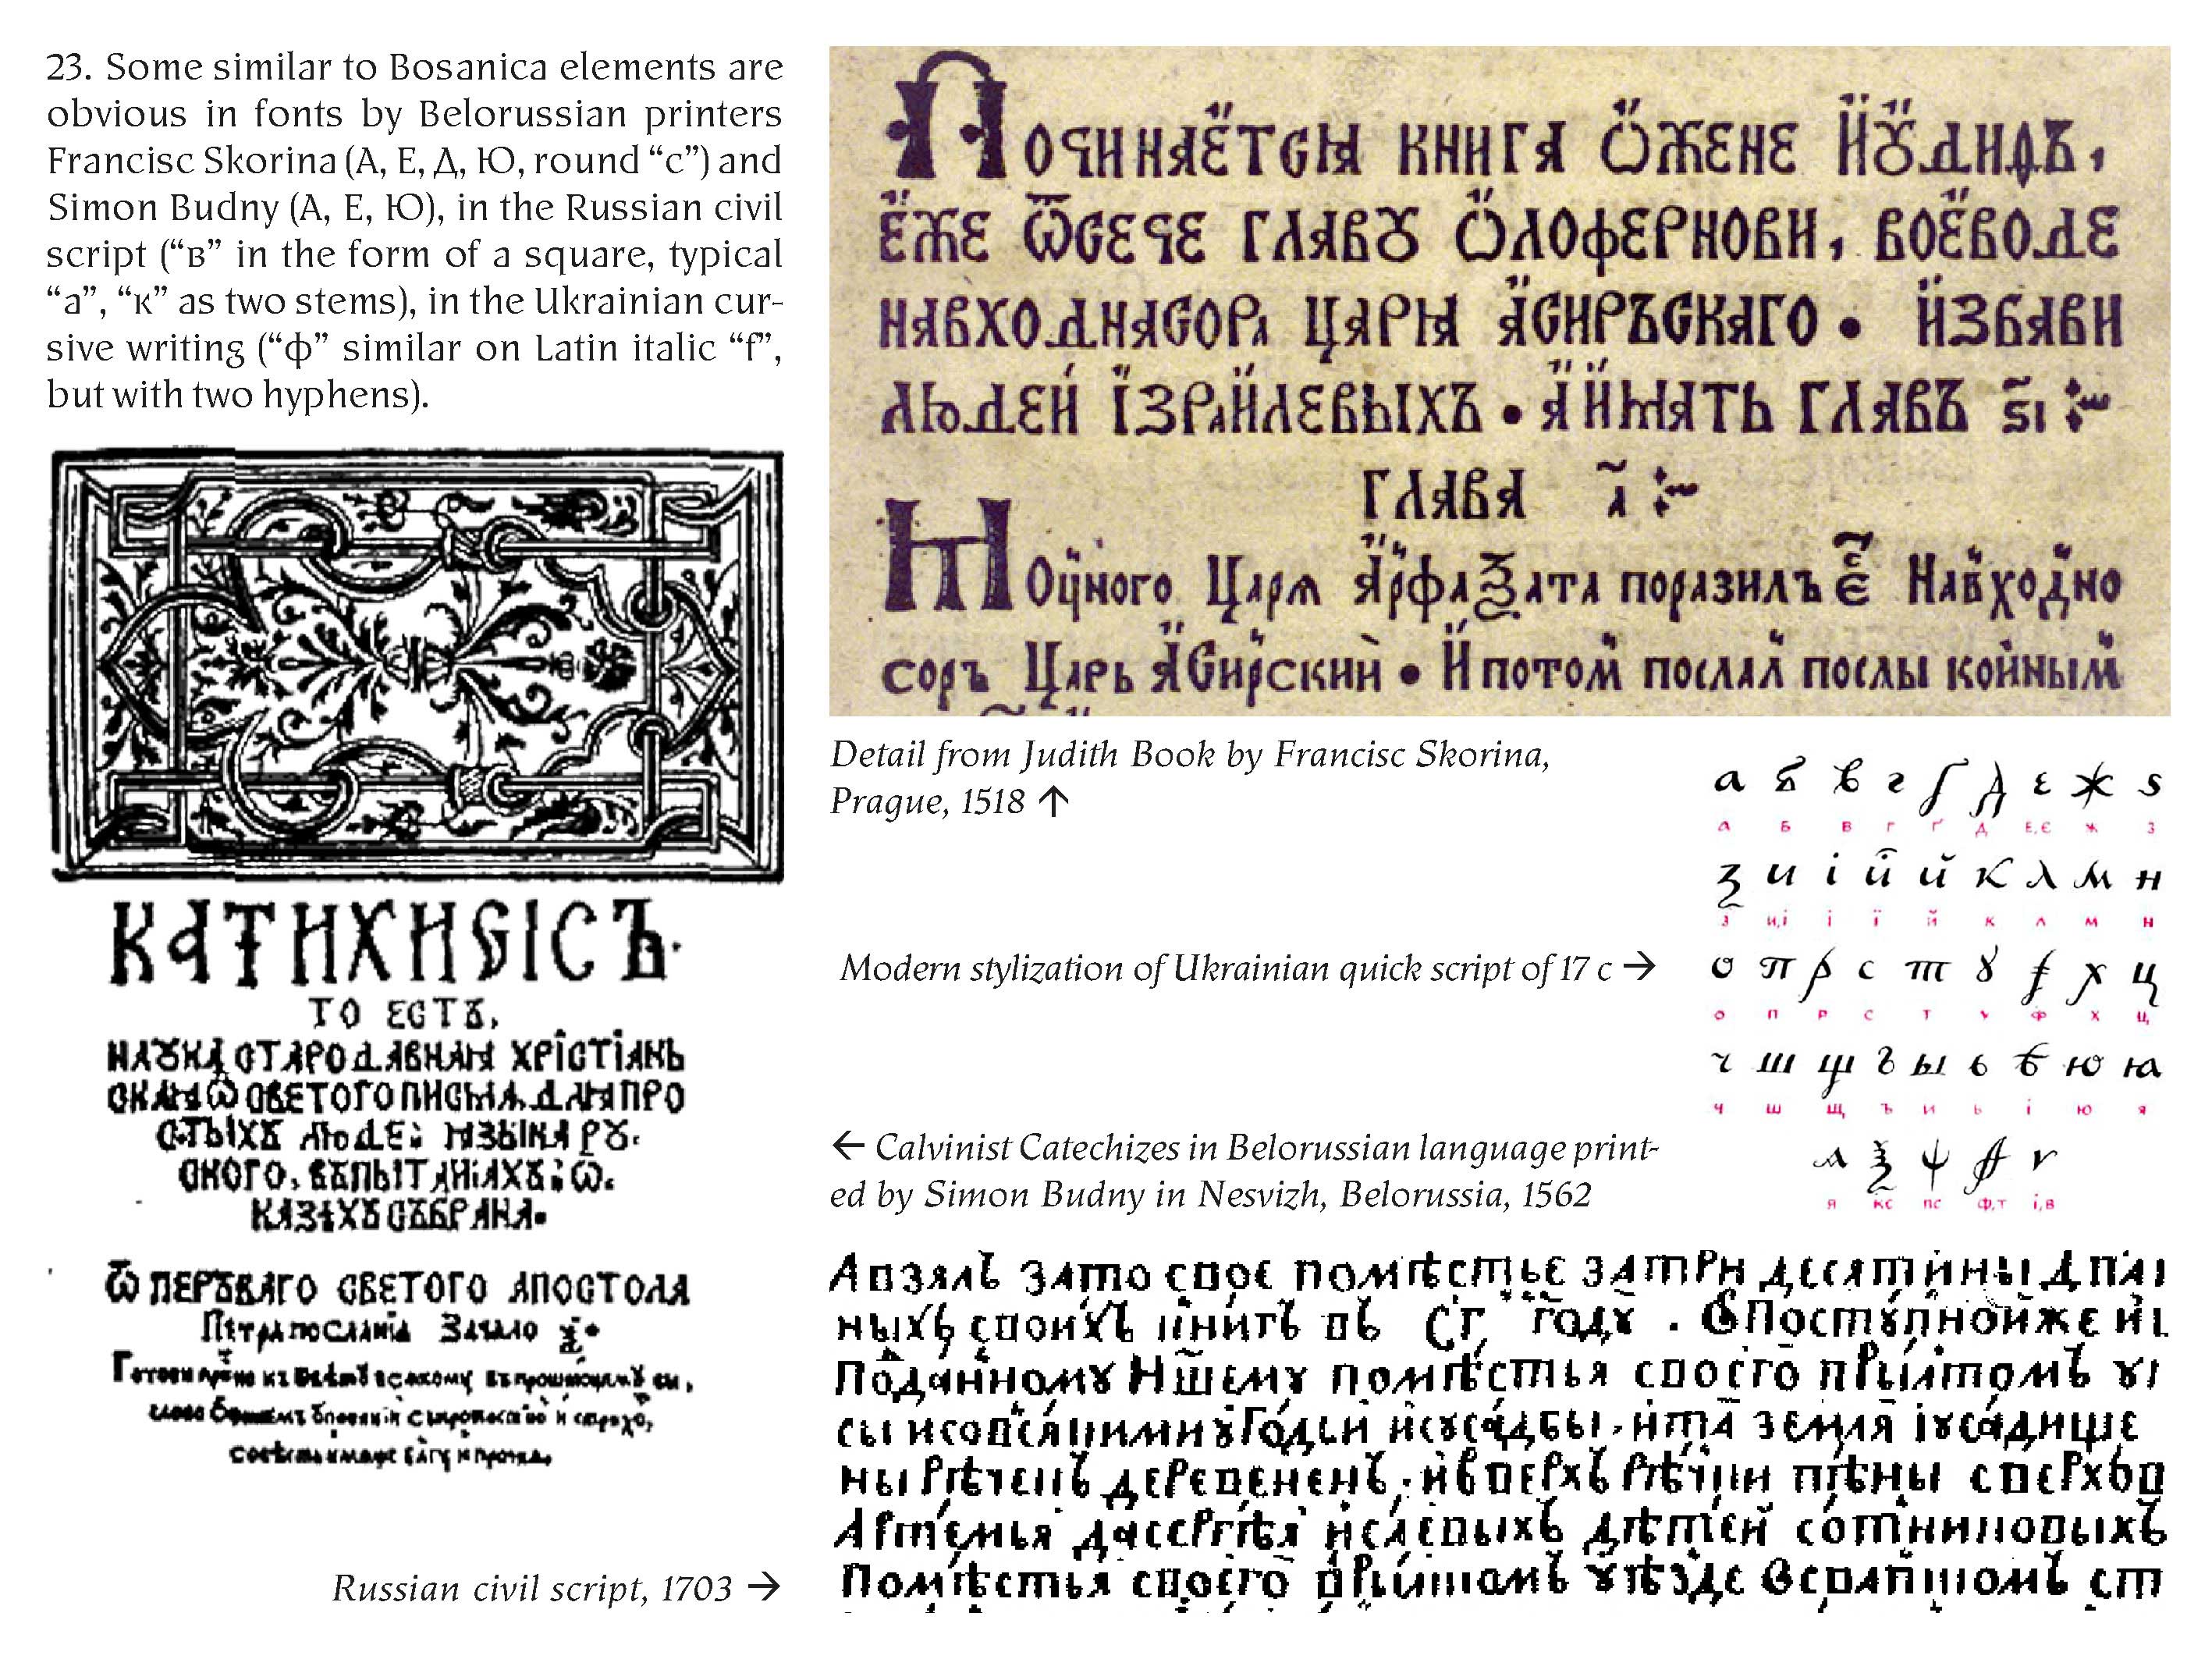 'Old Slavic alphabets and new fonts' by Viktor Kharyk